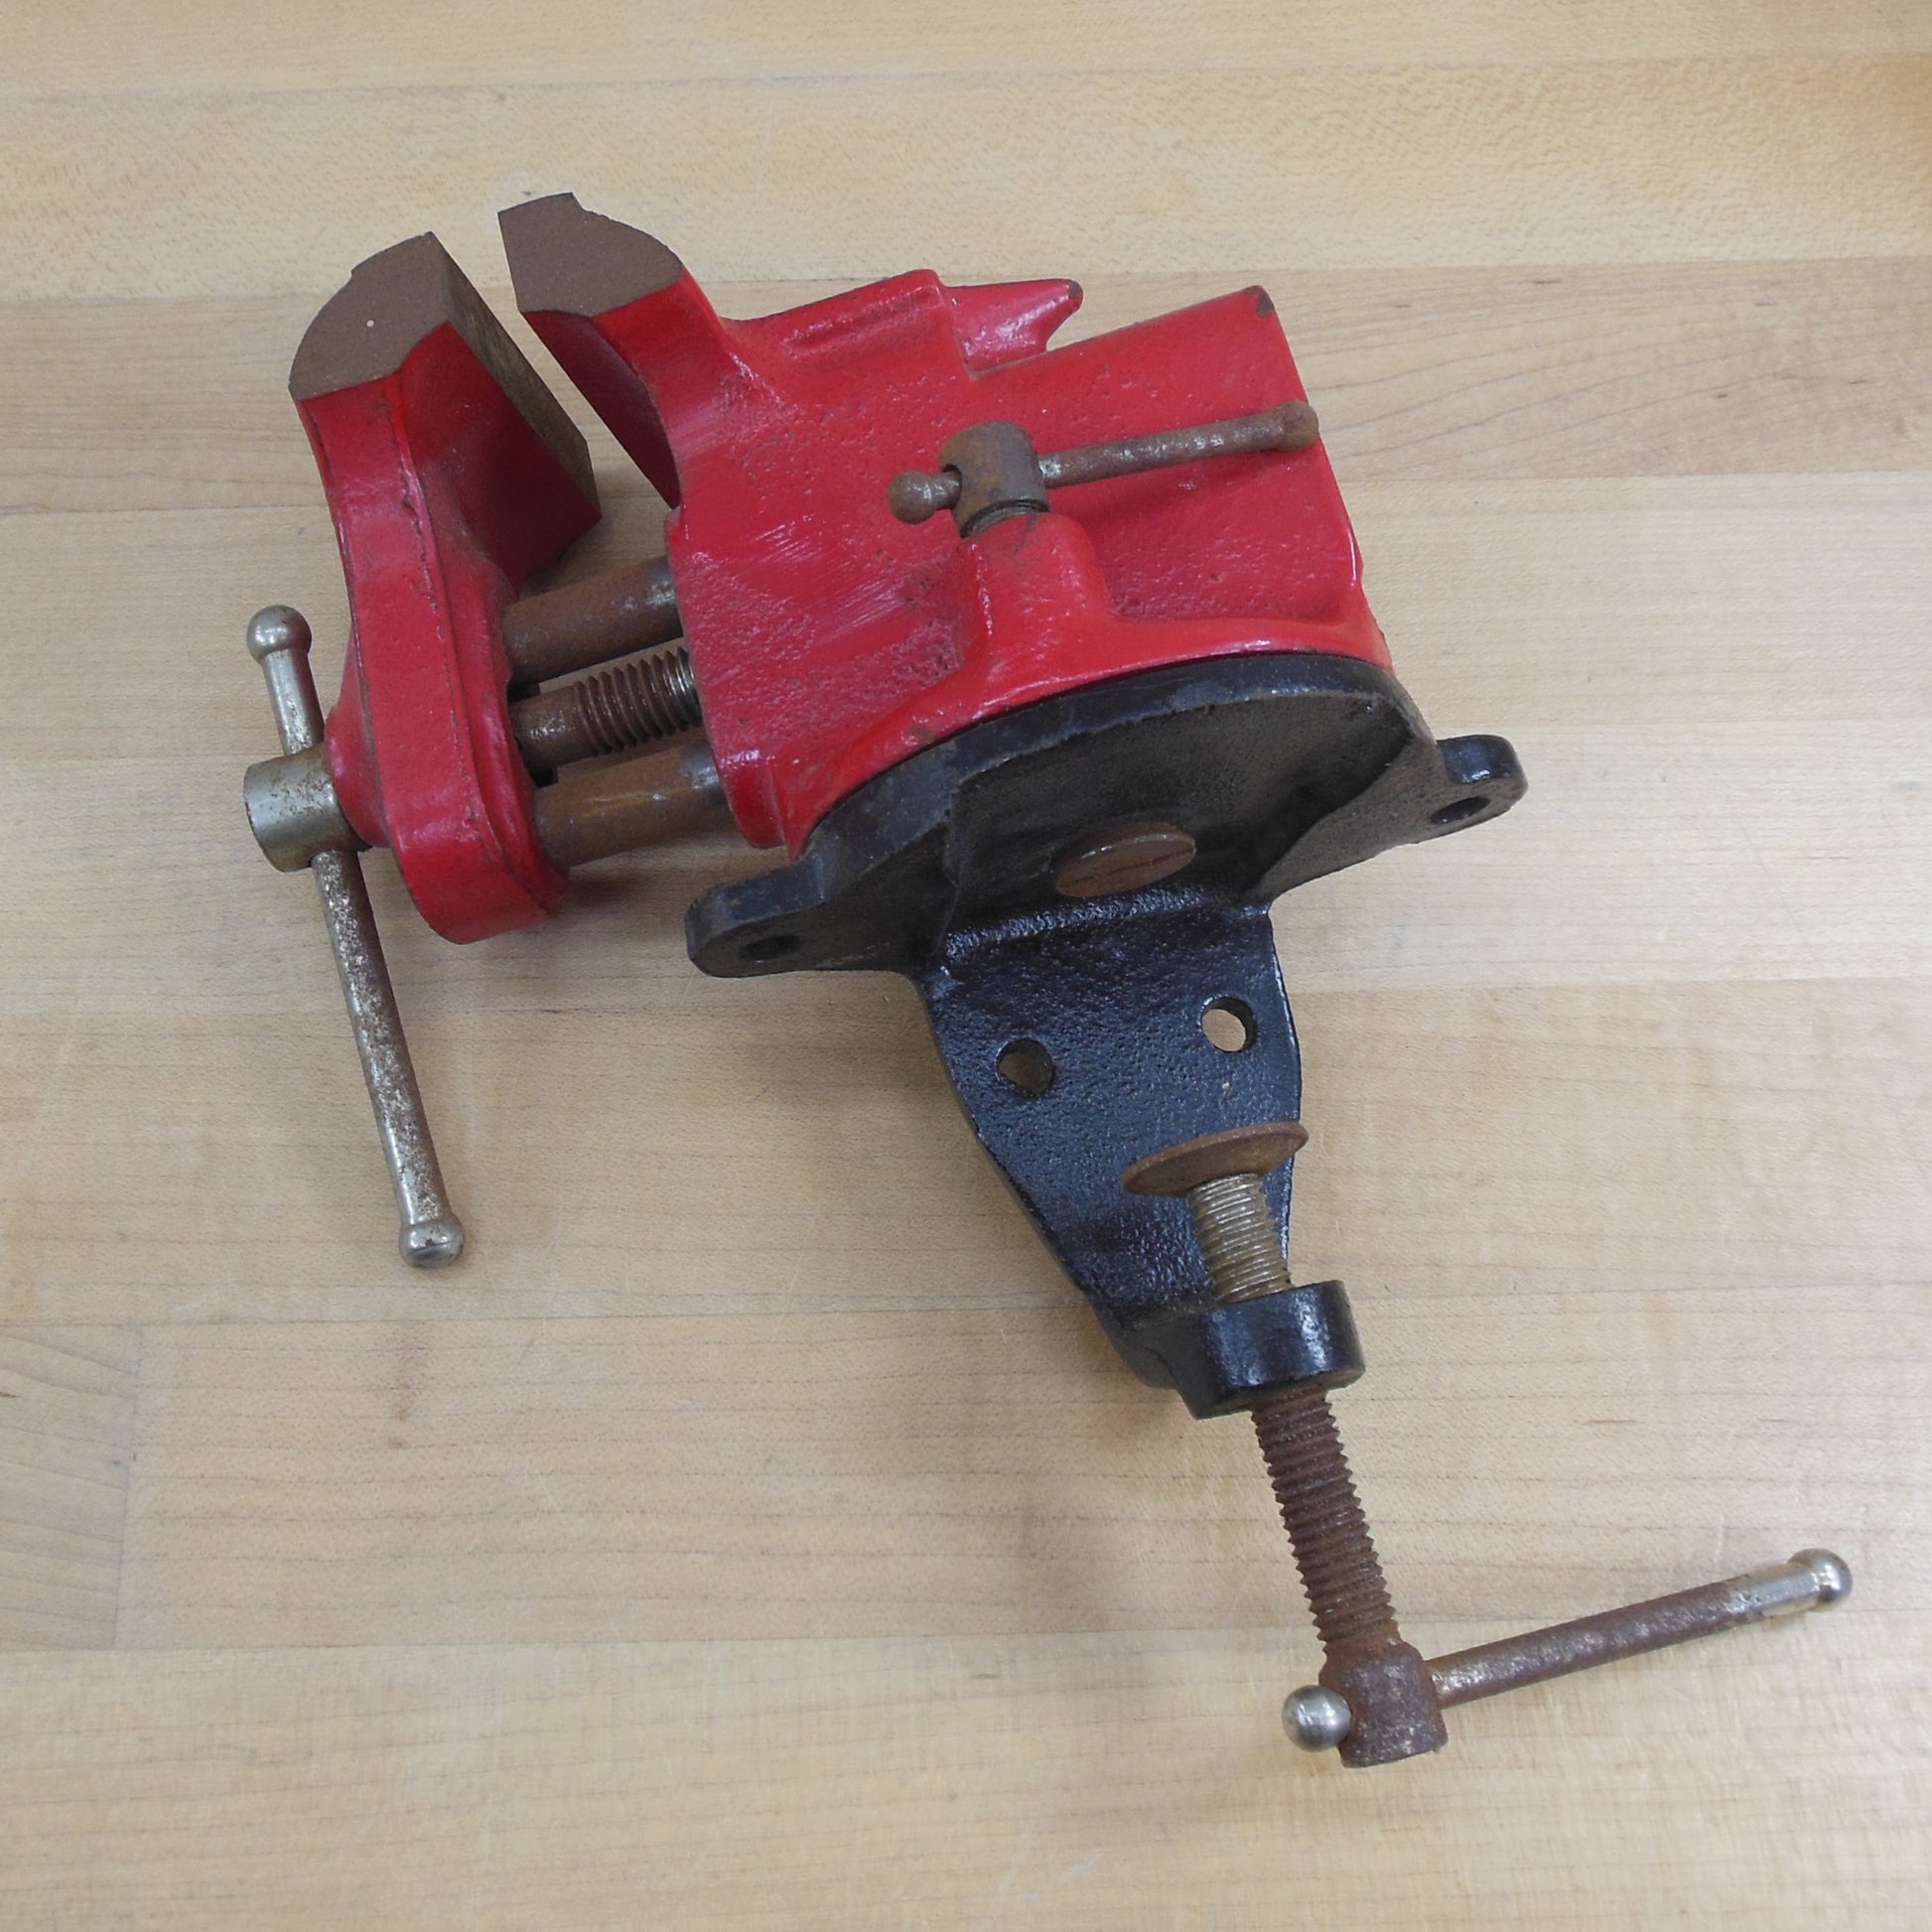 Unbranded Small Clamp On Bench Vise 2-1/2" Jaws Red Black